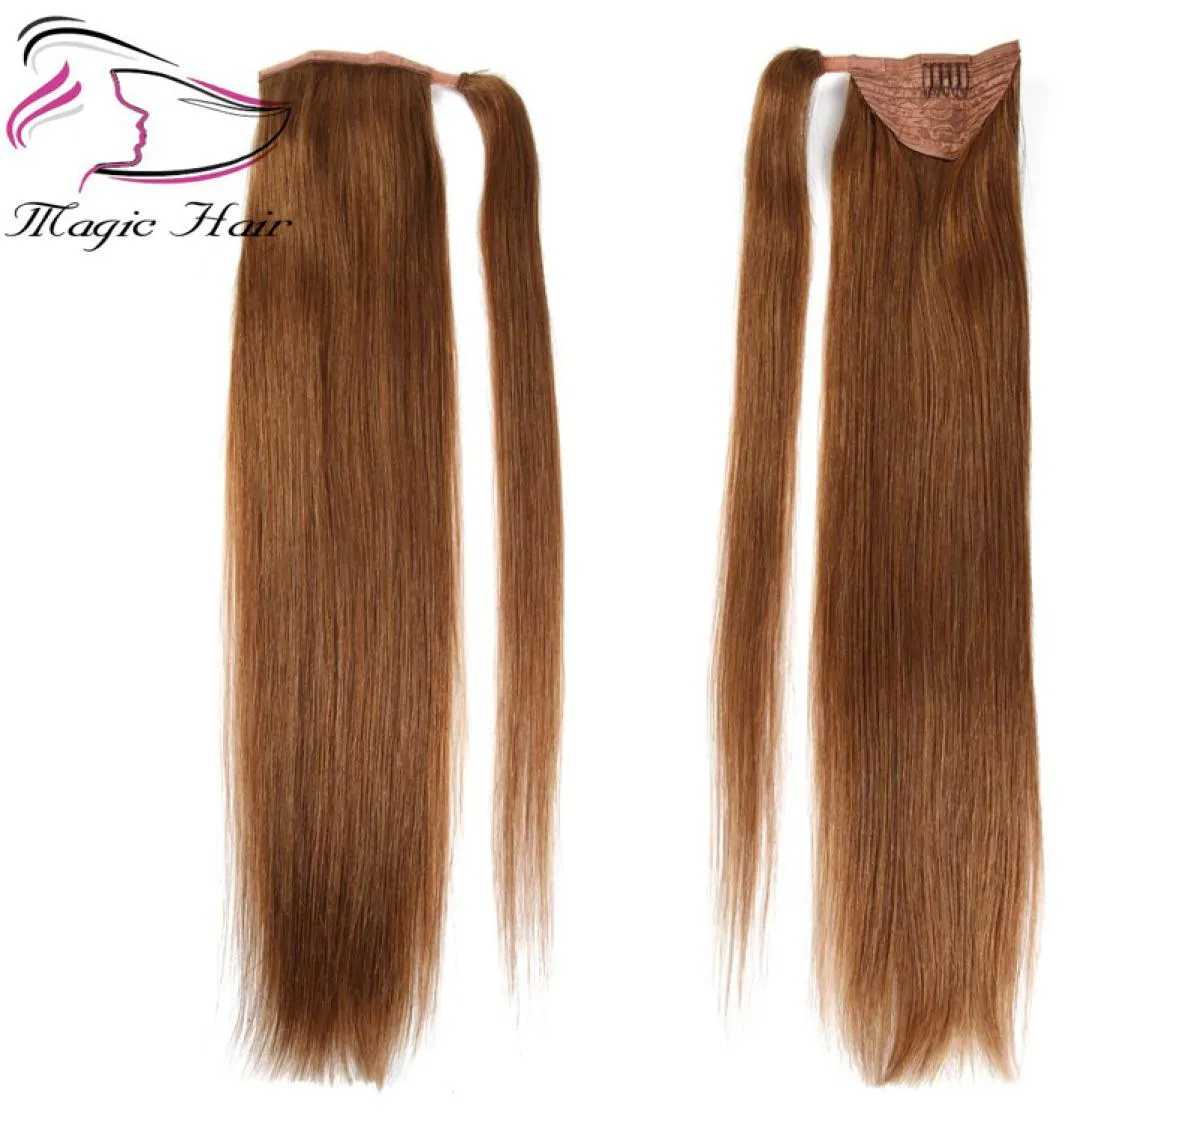 Evermagic Ponytail Human Hair Remy Straight European Ponytail Hairstyle 70g 100 Natural Hair Clip in Extensions4480903